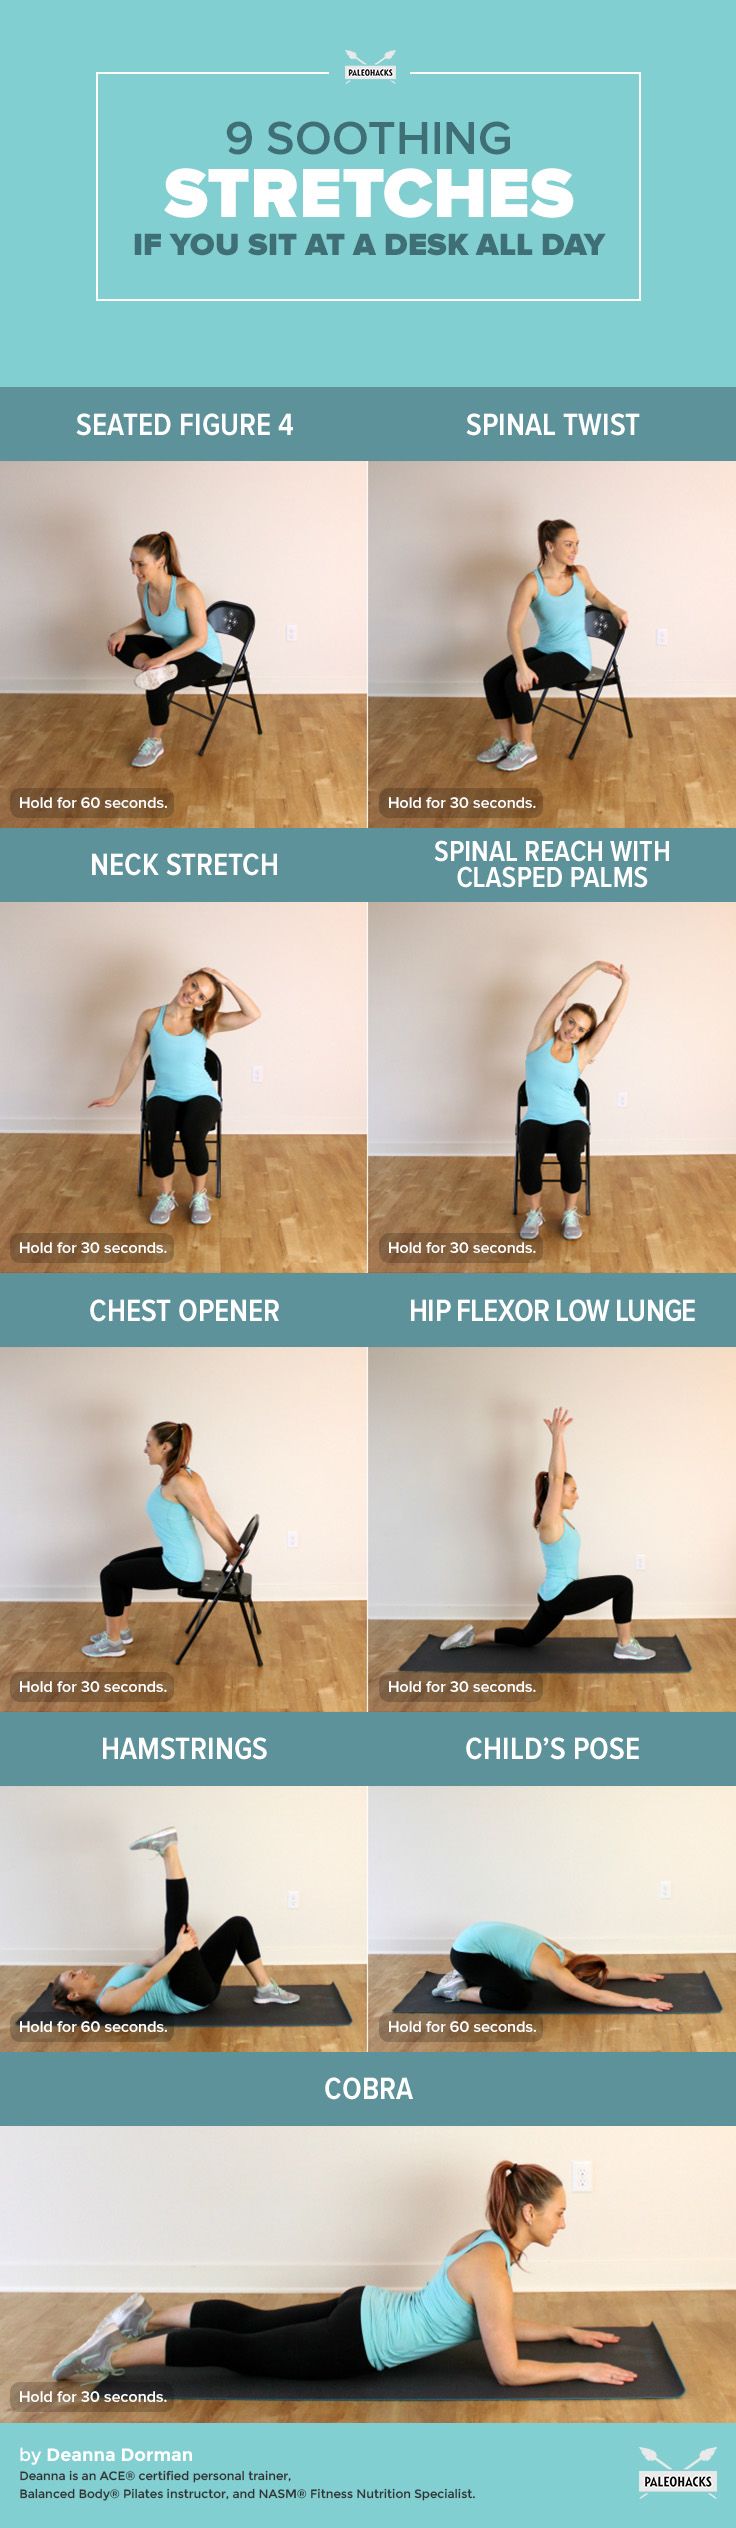 Stretches for lower back